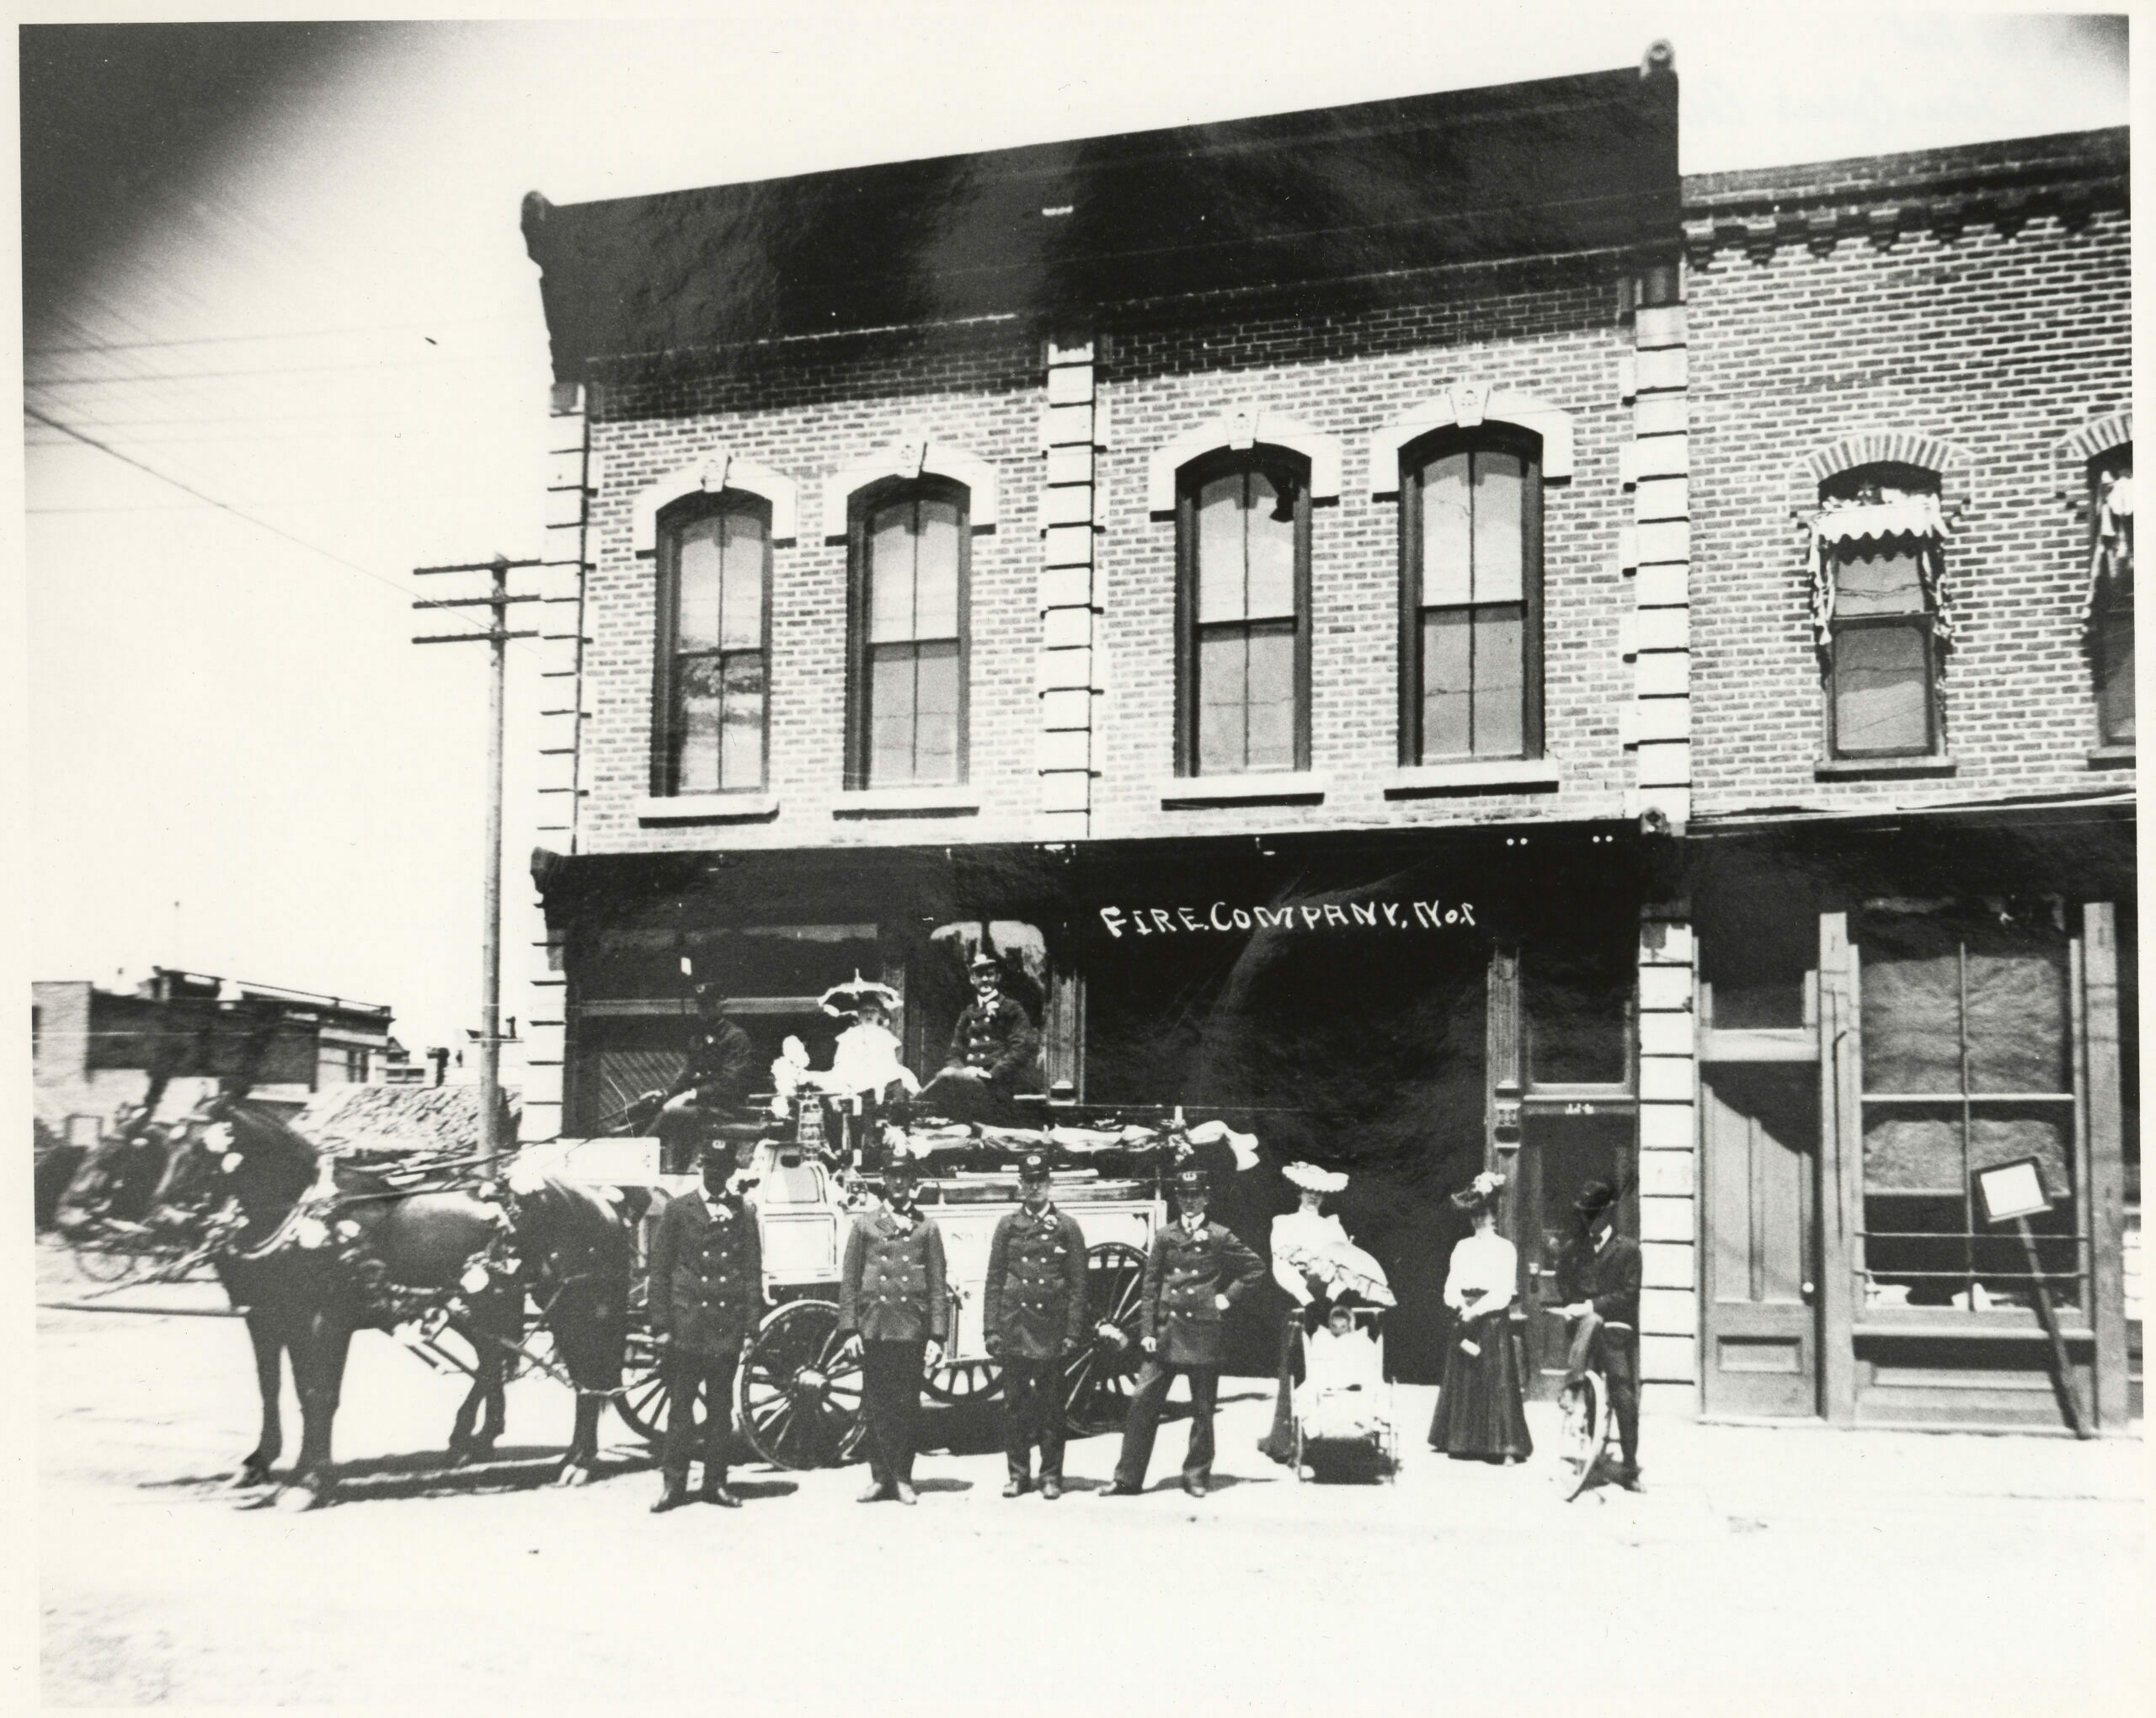 Construction rubble is heaped in the open space beyond the horses hitched to Salida’s new chemical and ladder truck about 1903. Unidentified firemen wear new dress uniforms, and harness on the team is complete with fancy decorations and feather plumes attached to the top of the bridles. When the town council outgrew its first offices, members bought Fraternity Hall at 140 E St. and moved the new fire equipment in downstairs and took the upstairs for city offices. By 1911, firemen were moved into the building at the right and city offices expanded onto both floors in Fraternity Hall. Both buildings are still used for city offices and fire department equipment. This truck is the only one that the fire department doesn’t still have.  (1)